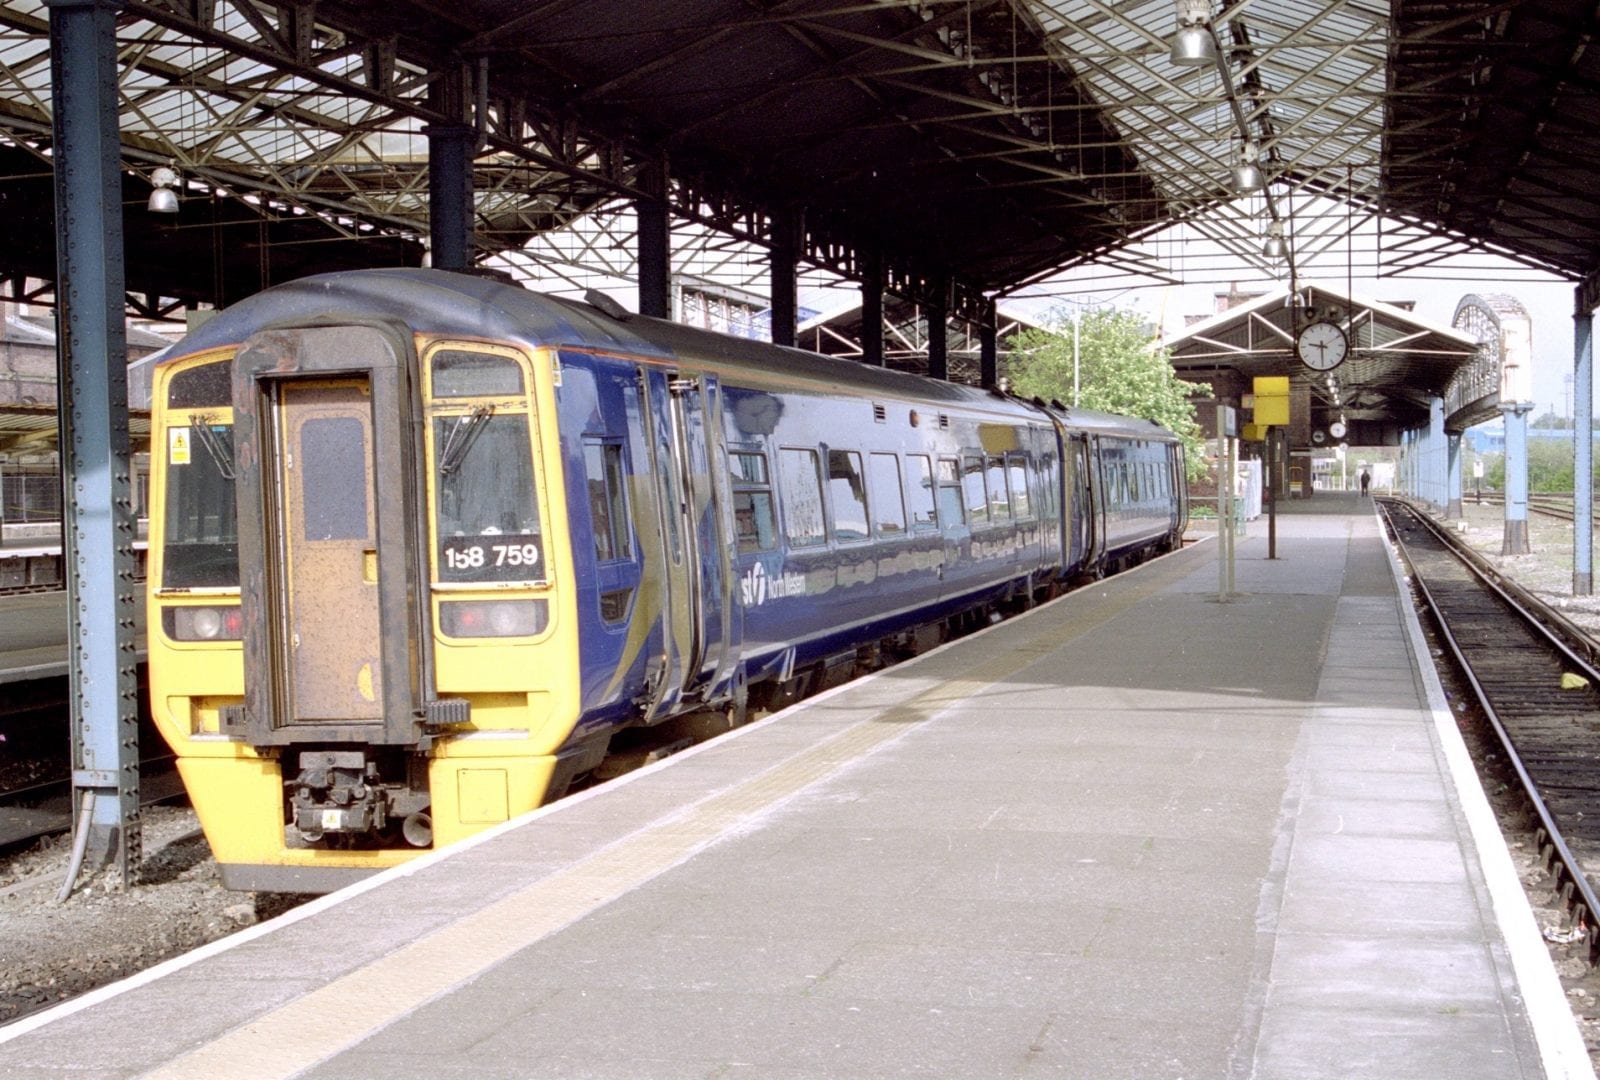 158 759 at Chester Station awaiting departure for Manchester Piccadilly 25 April 2002<br />©2021 MCRUA